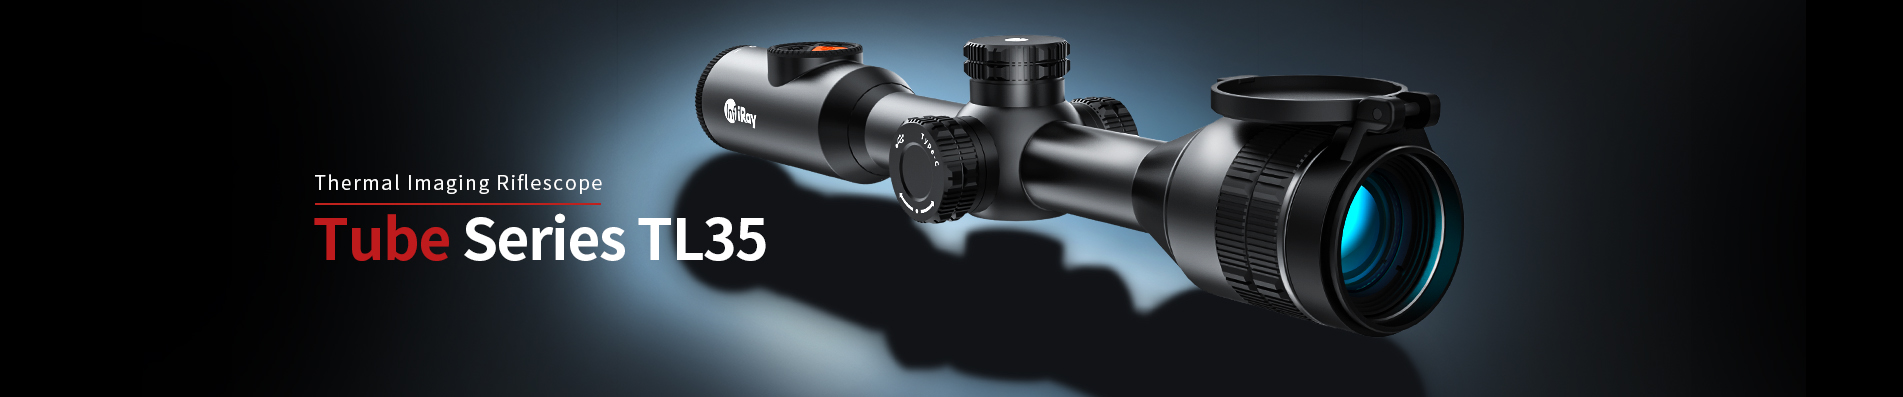 Thermal Imaging Riflescope Tube TL35  (BOLT in the US)